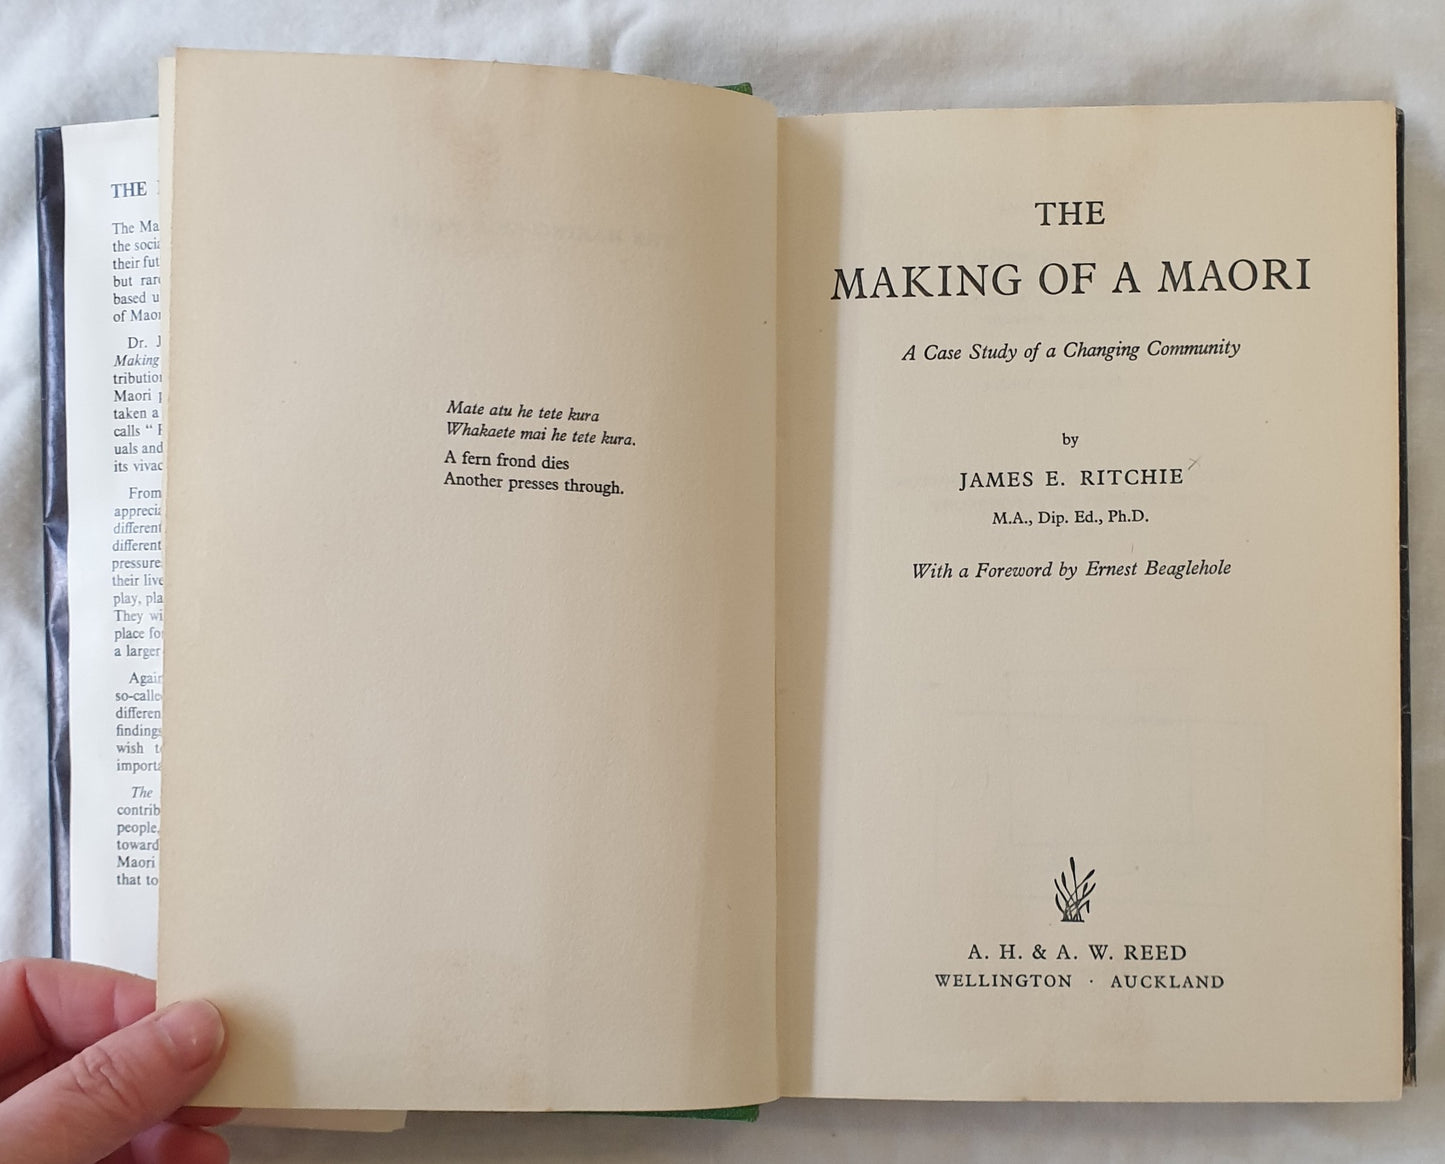 The Making of a Maori by James E. Ritchie